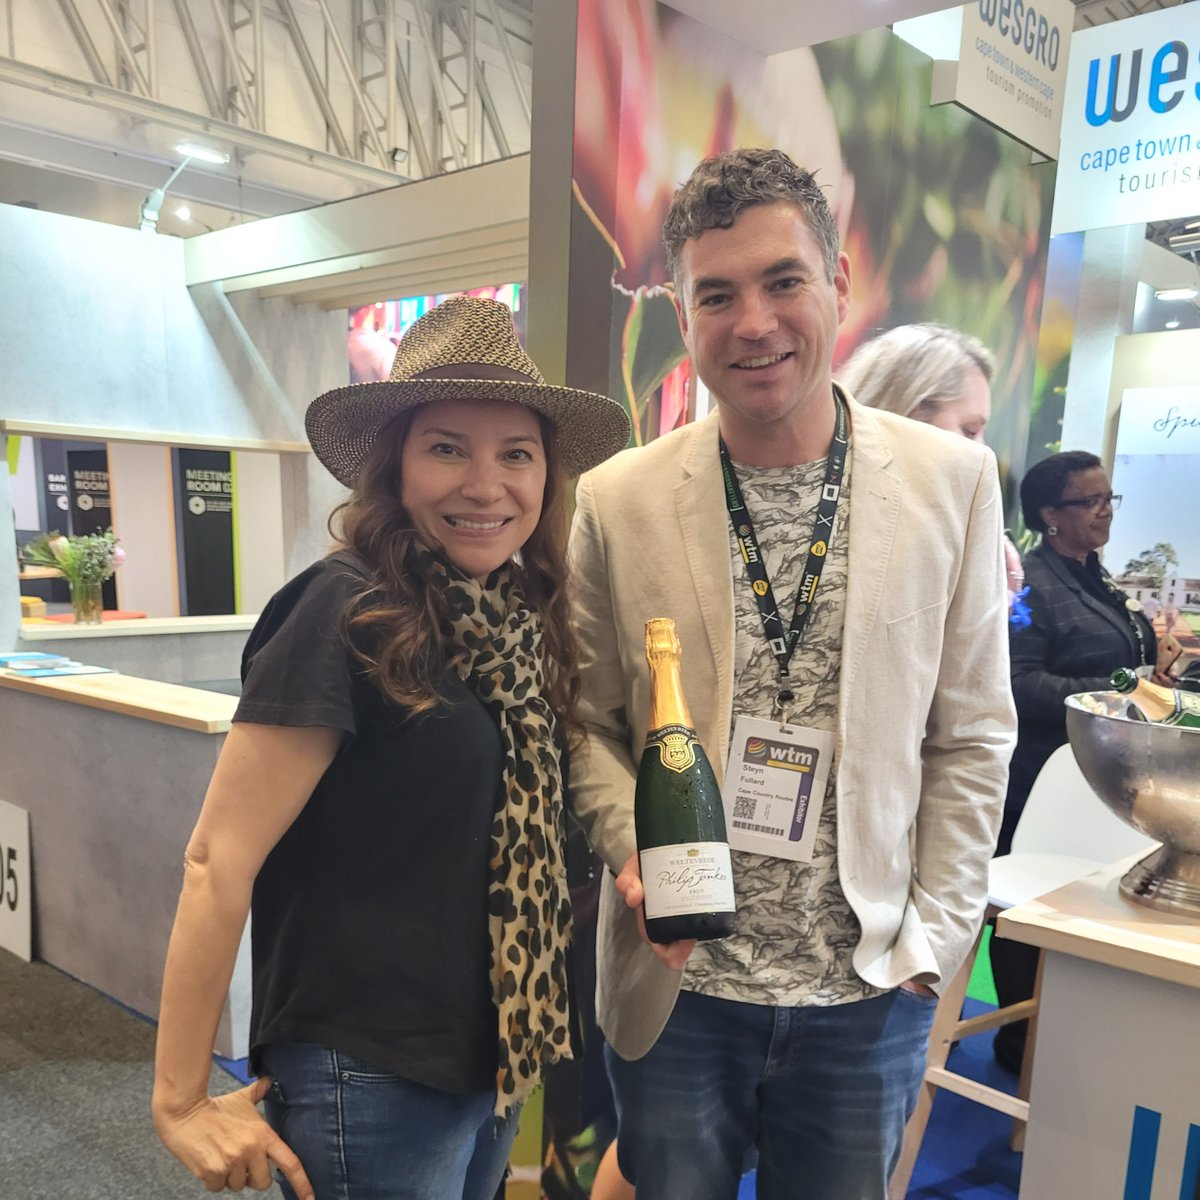 The Wine & Flora Garden on the @Wesgro stand was a real highlight at #WTMAfrica Regions like the West Coast presented tastings along with #BestofWineTourism winners from @WineCapitals 🥂 @Vinpro_za @VisitWinelands